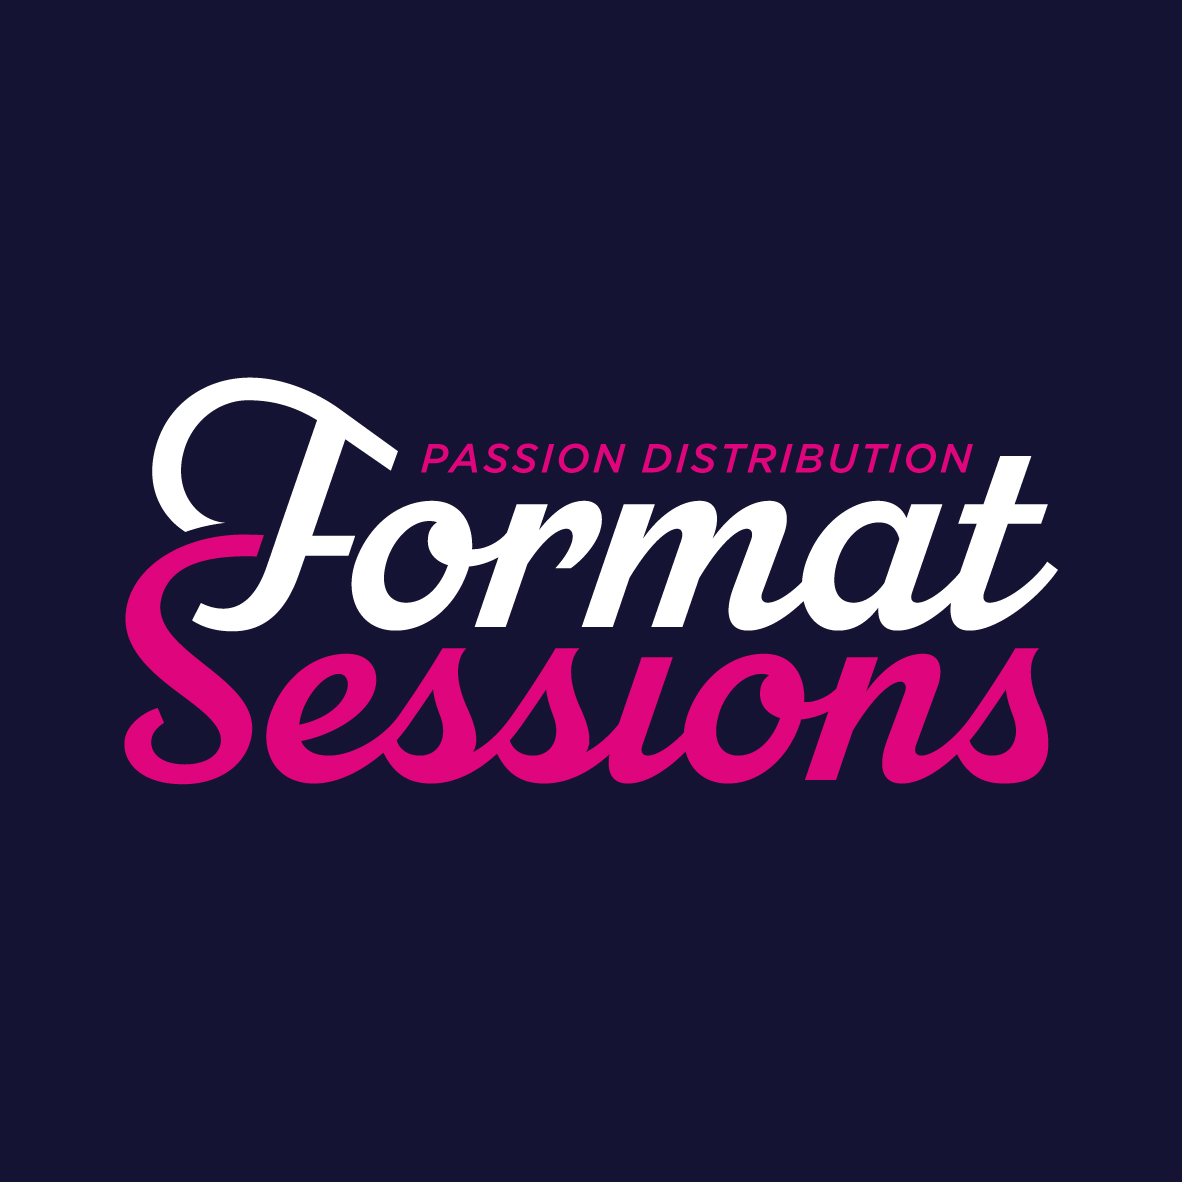 PASSION_FORMATS_SESSIONS_LOGO.png